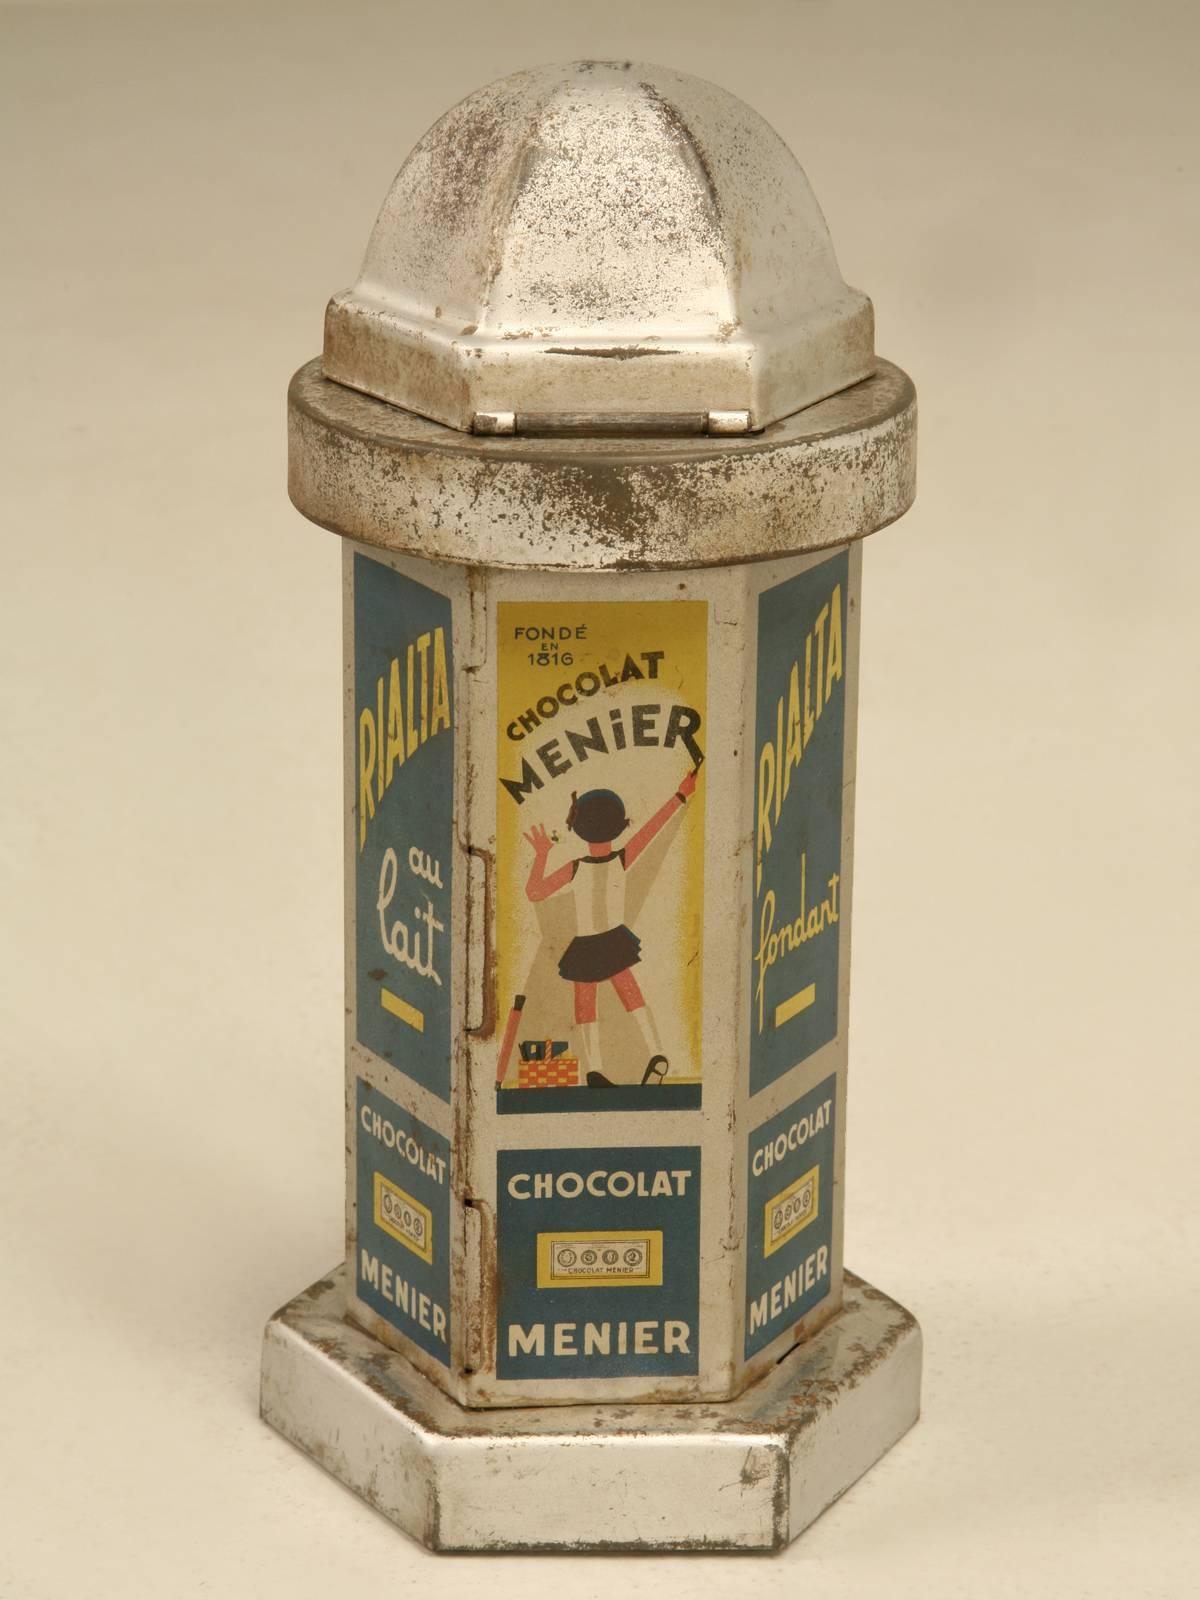 Small silver-lacquered sheet metal Chocolate dispenser designed as city Kiosk with printed decoration of the brand’s advertisements. 
In 1830 the Menier company made its first mechanized mass production factory for cocoa powder in France. Following